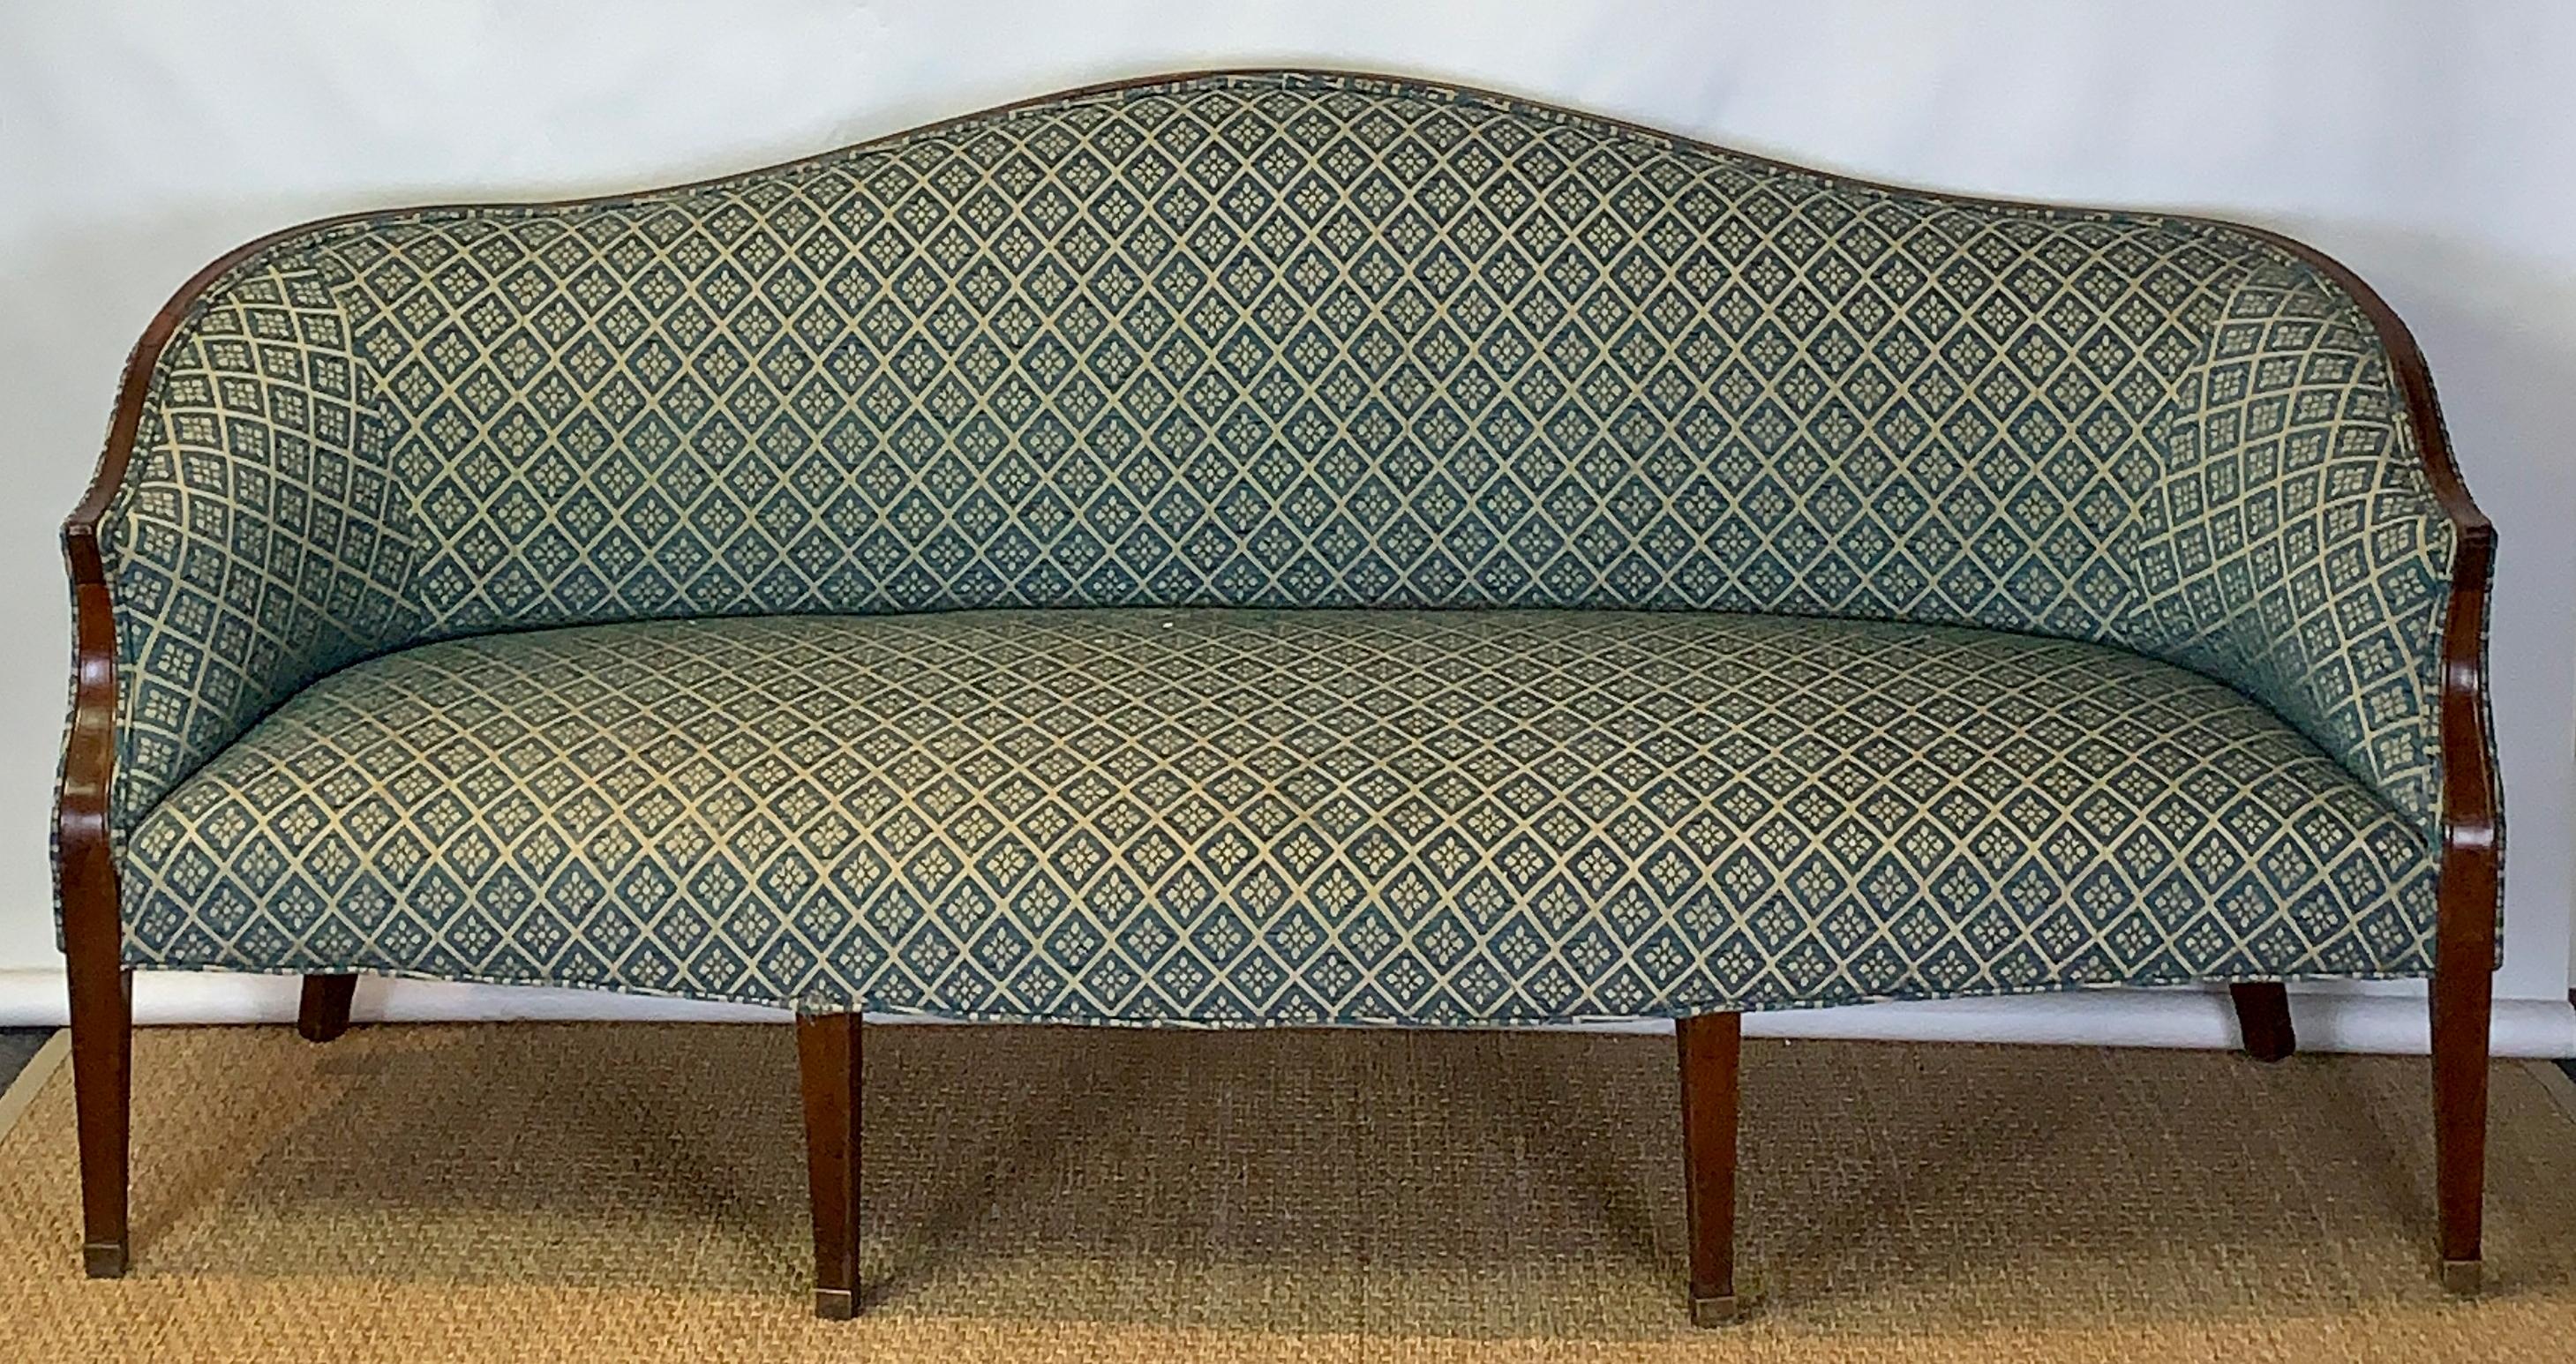 An early 19th C. American, possibly Baltimore, mahogany arched back sofa or settee upholstered in a blue tapestry style fabric supported on square tapering legs terminating in brass capped feet.